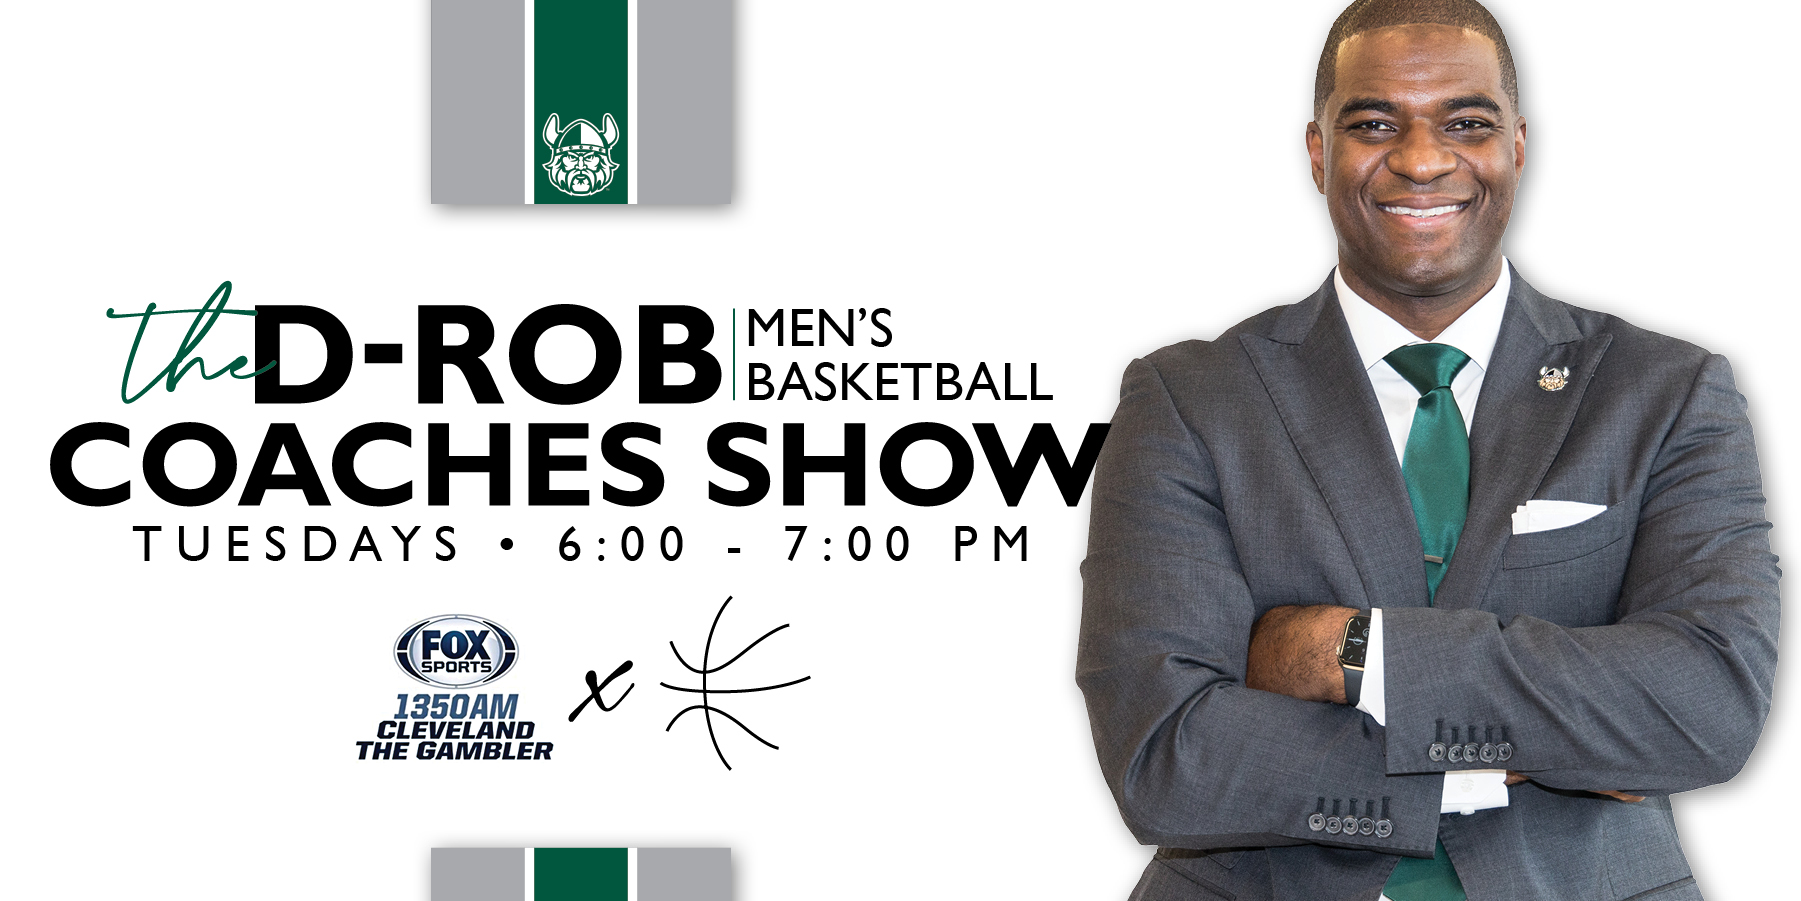 D-Rob Men’s Basketball Coaches Show Broadcast On Tap Tonight at TopGolf